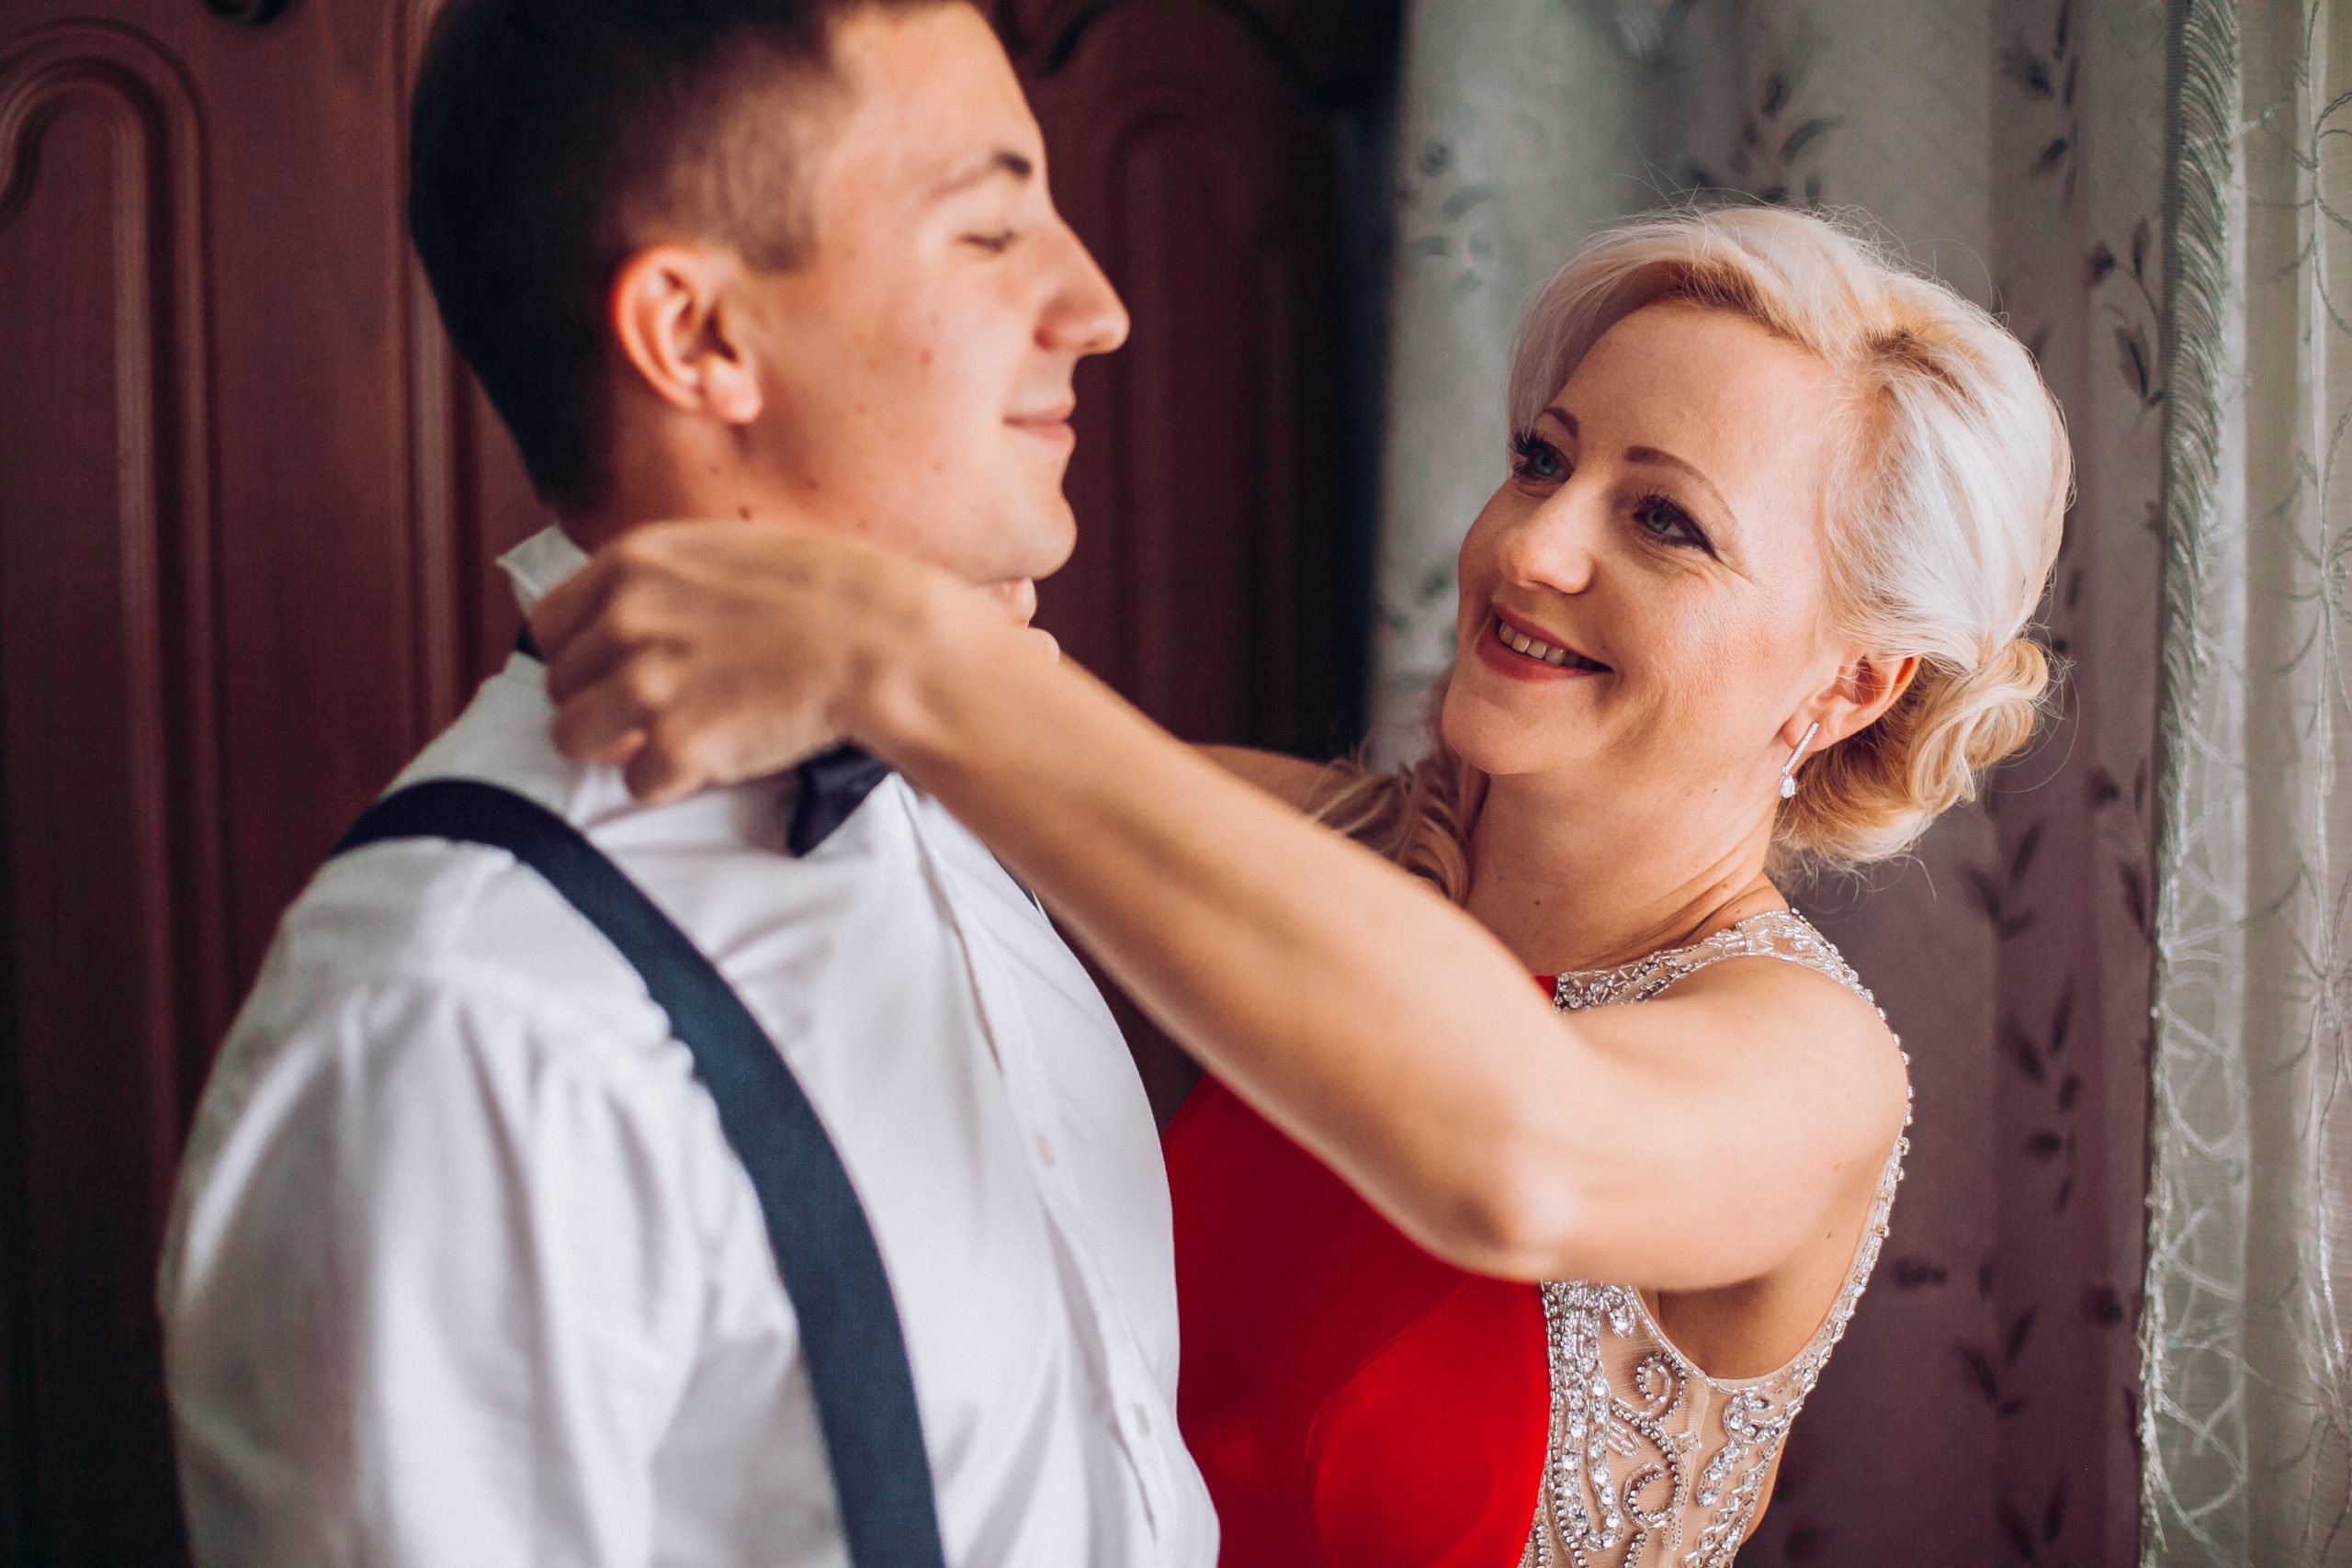 Mother Is Helping With A Bow Tie To Her Son Before Wedding Ceremony. Concept Mother And Son.